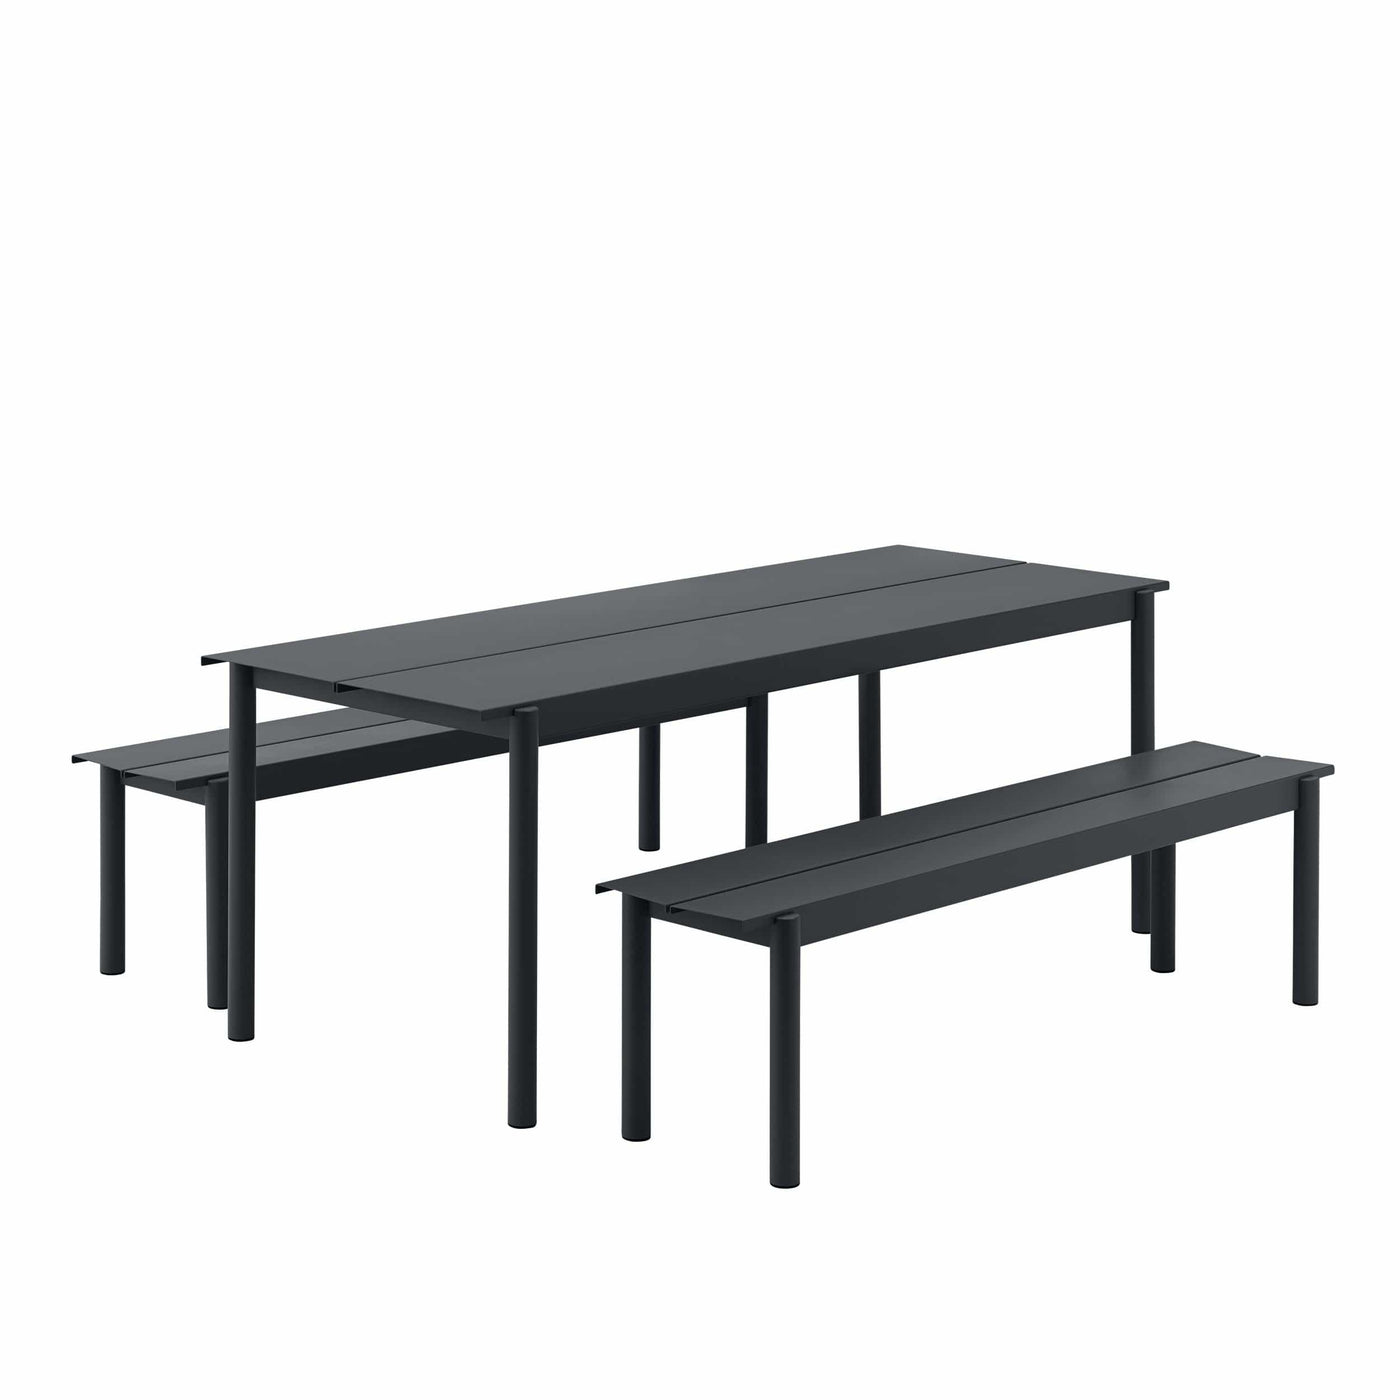 Muuto Linear Steel Table & Bench in black, available from someday designs. #colour_black